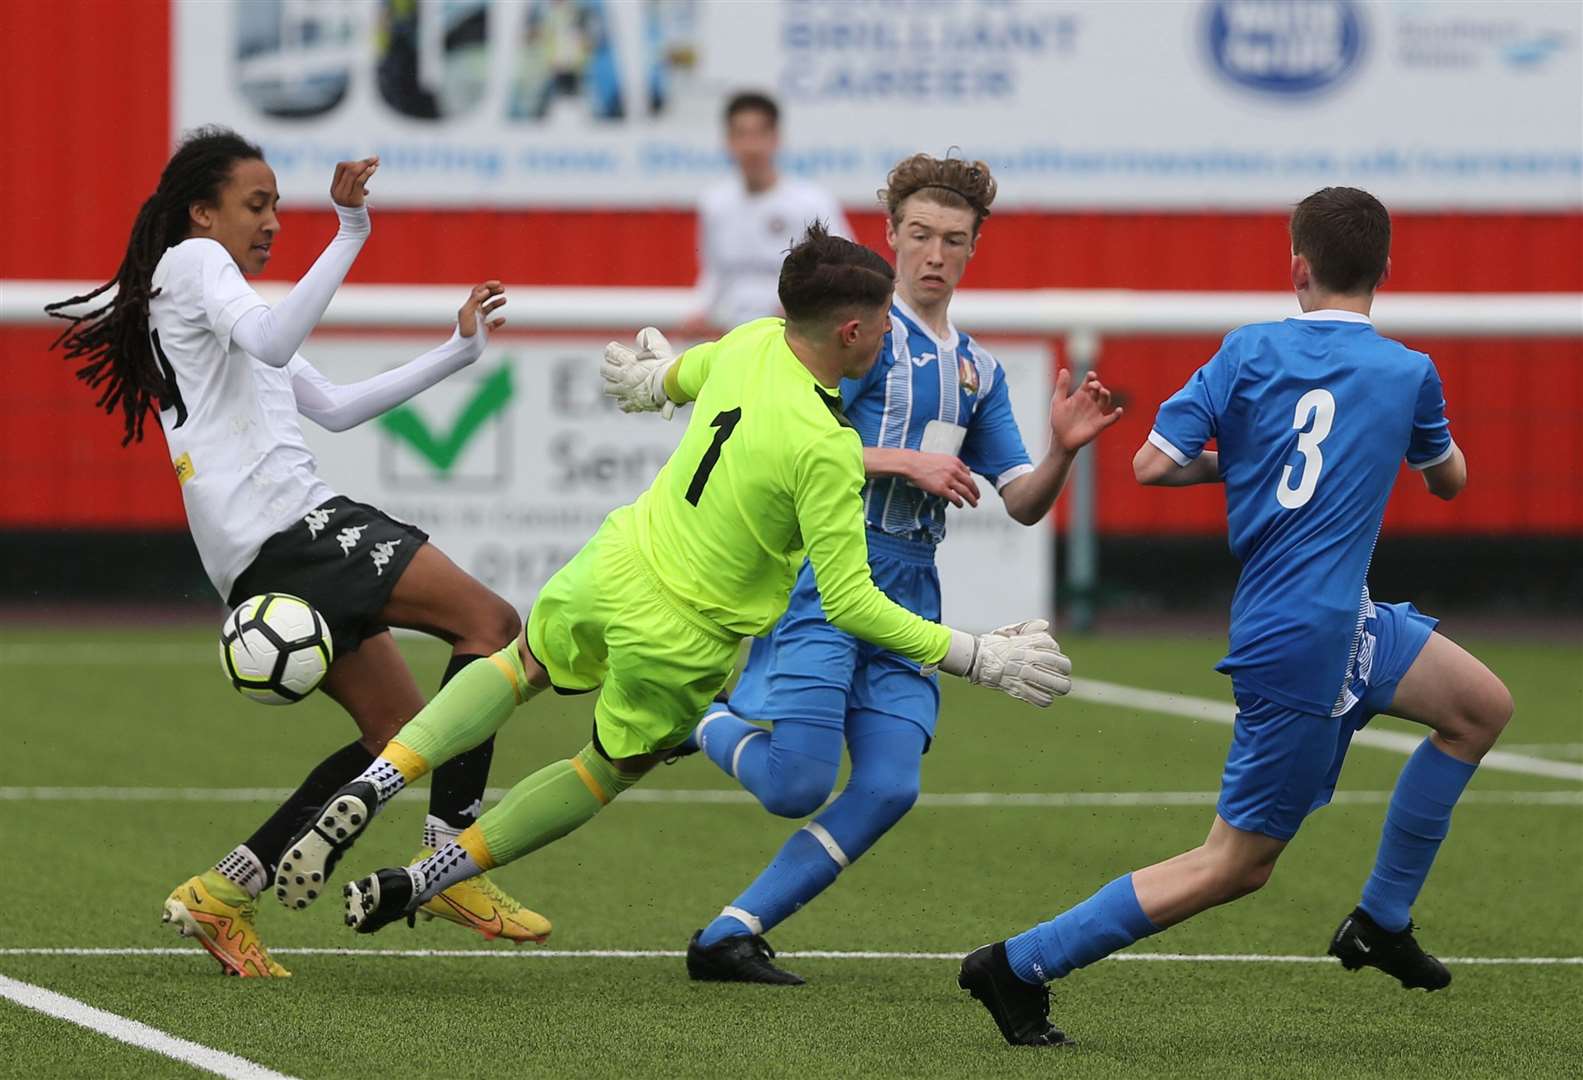 Goalmouth action during the Kent Merit Under-14 Boys Cup Final. Picture: PSP Images